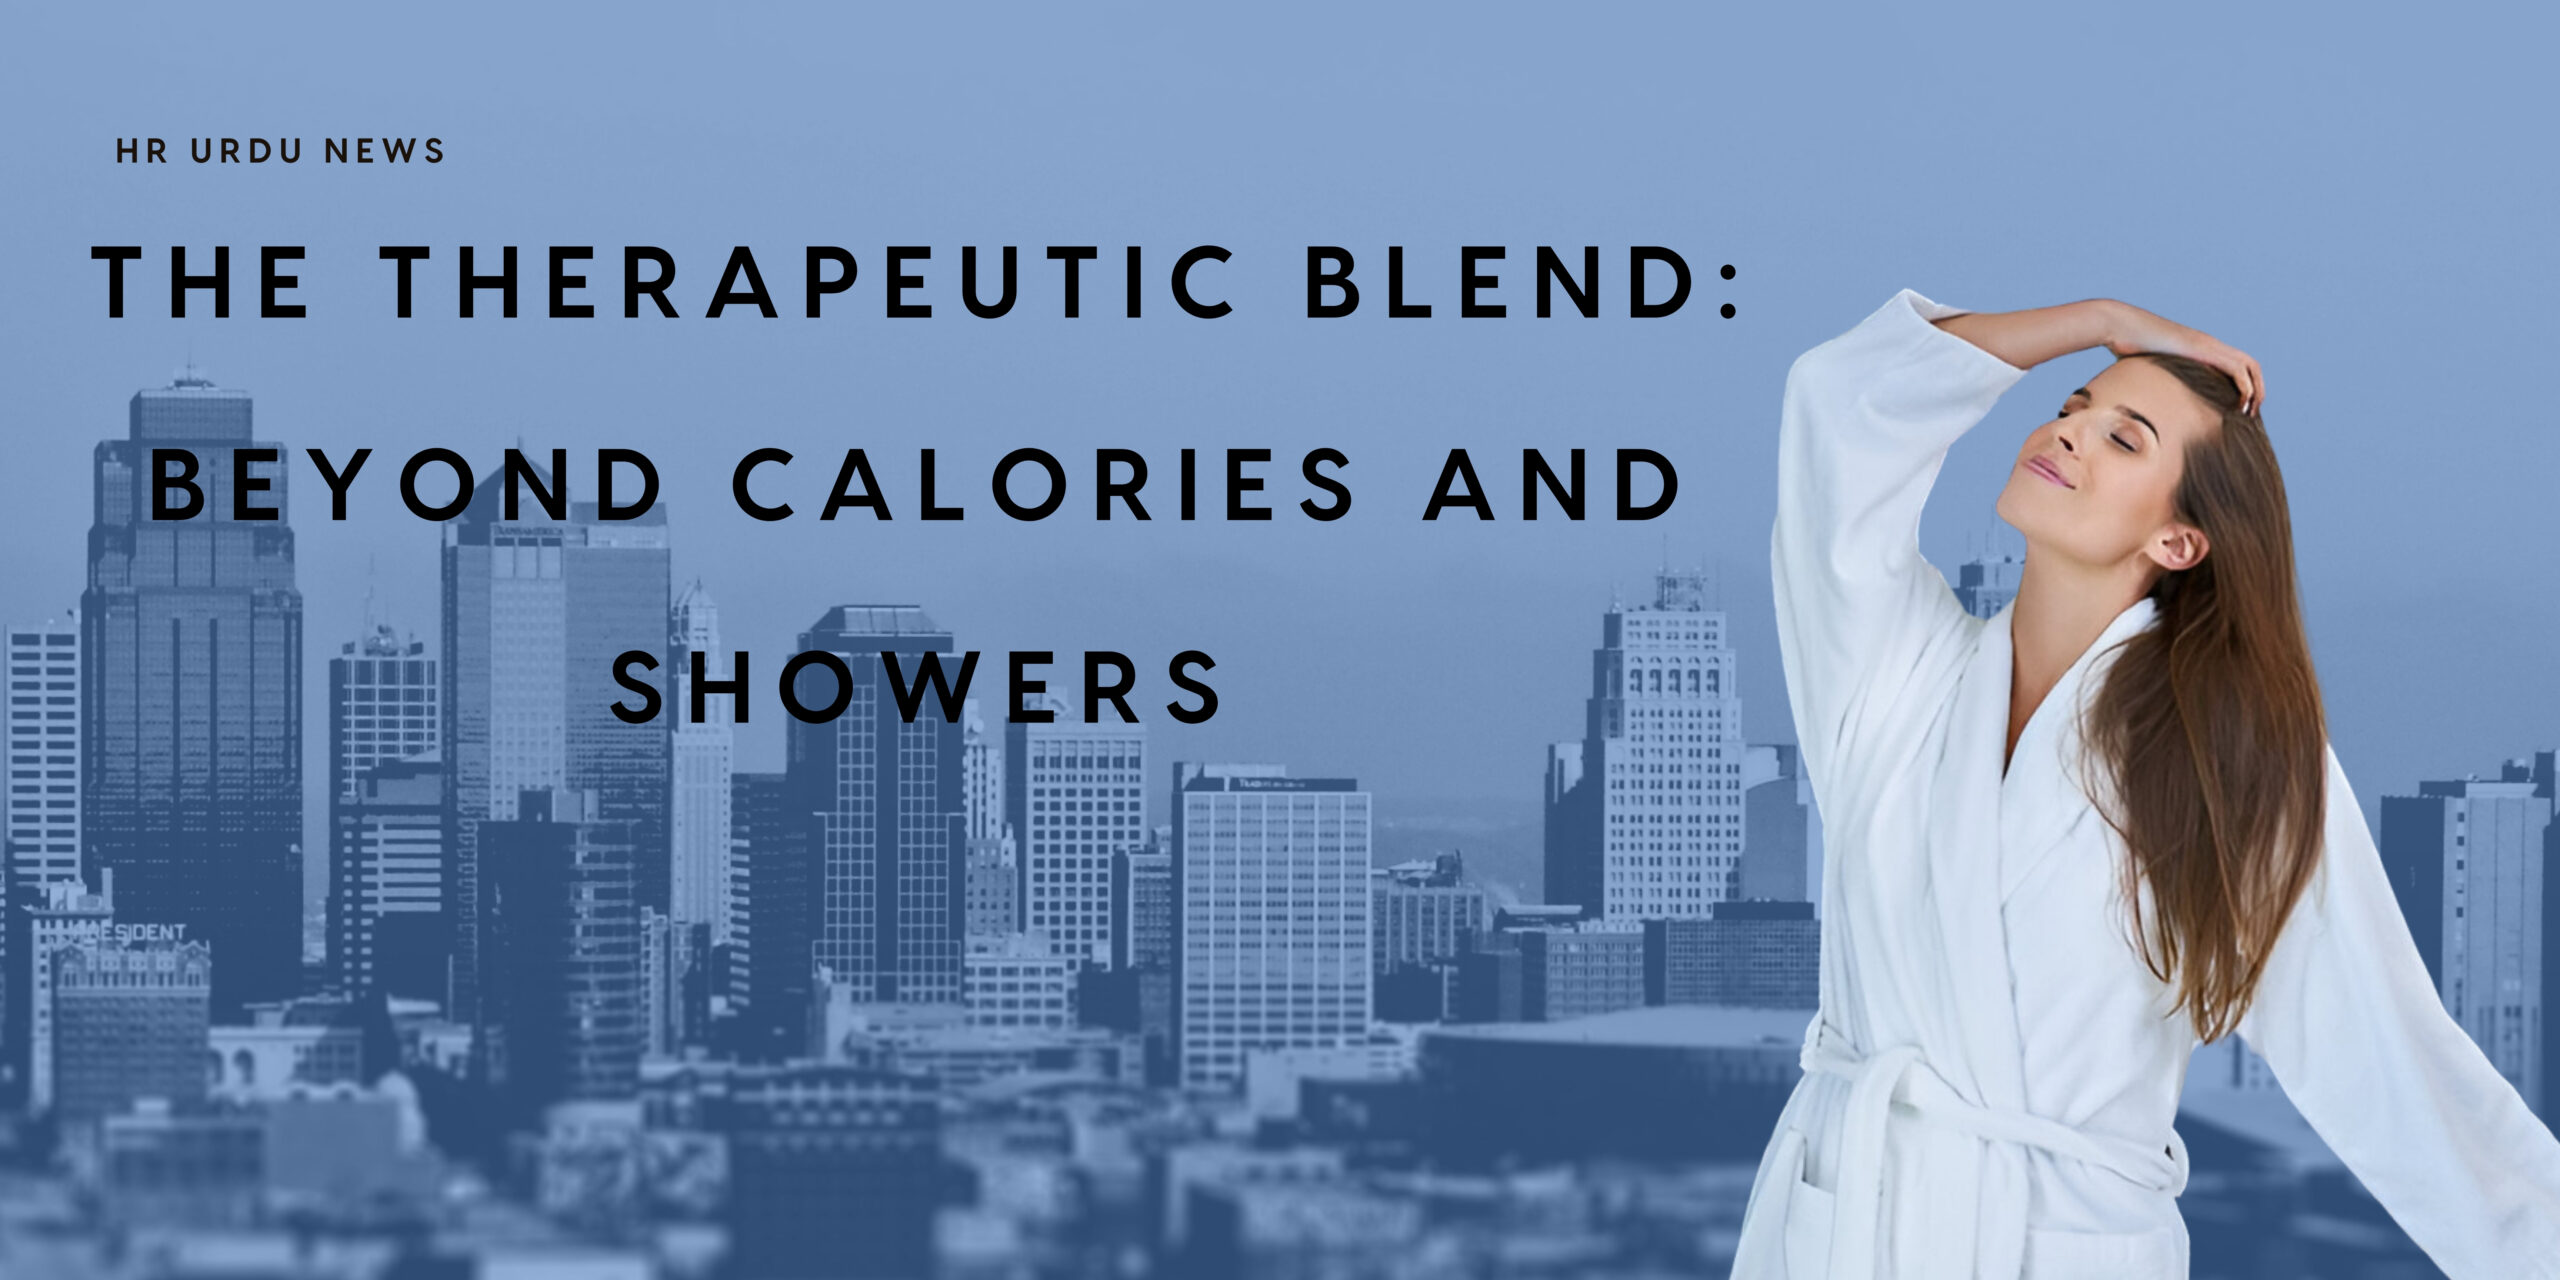 The Therapeutic Blend: Beyond Calories and Showers